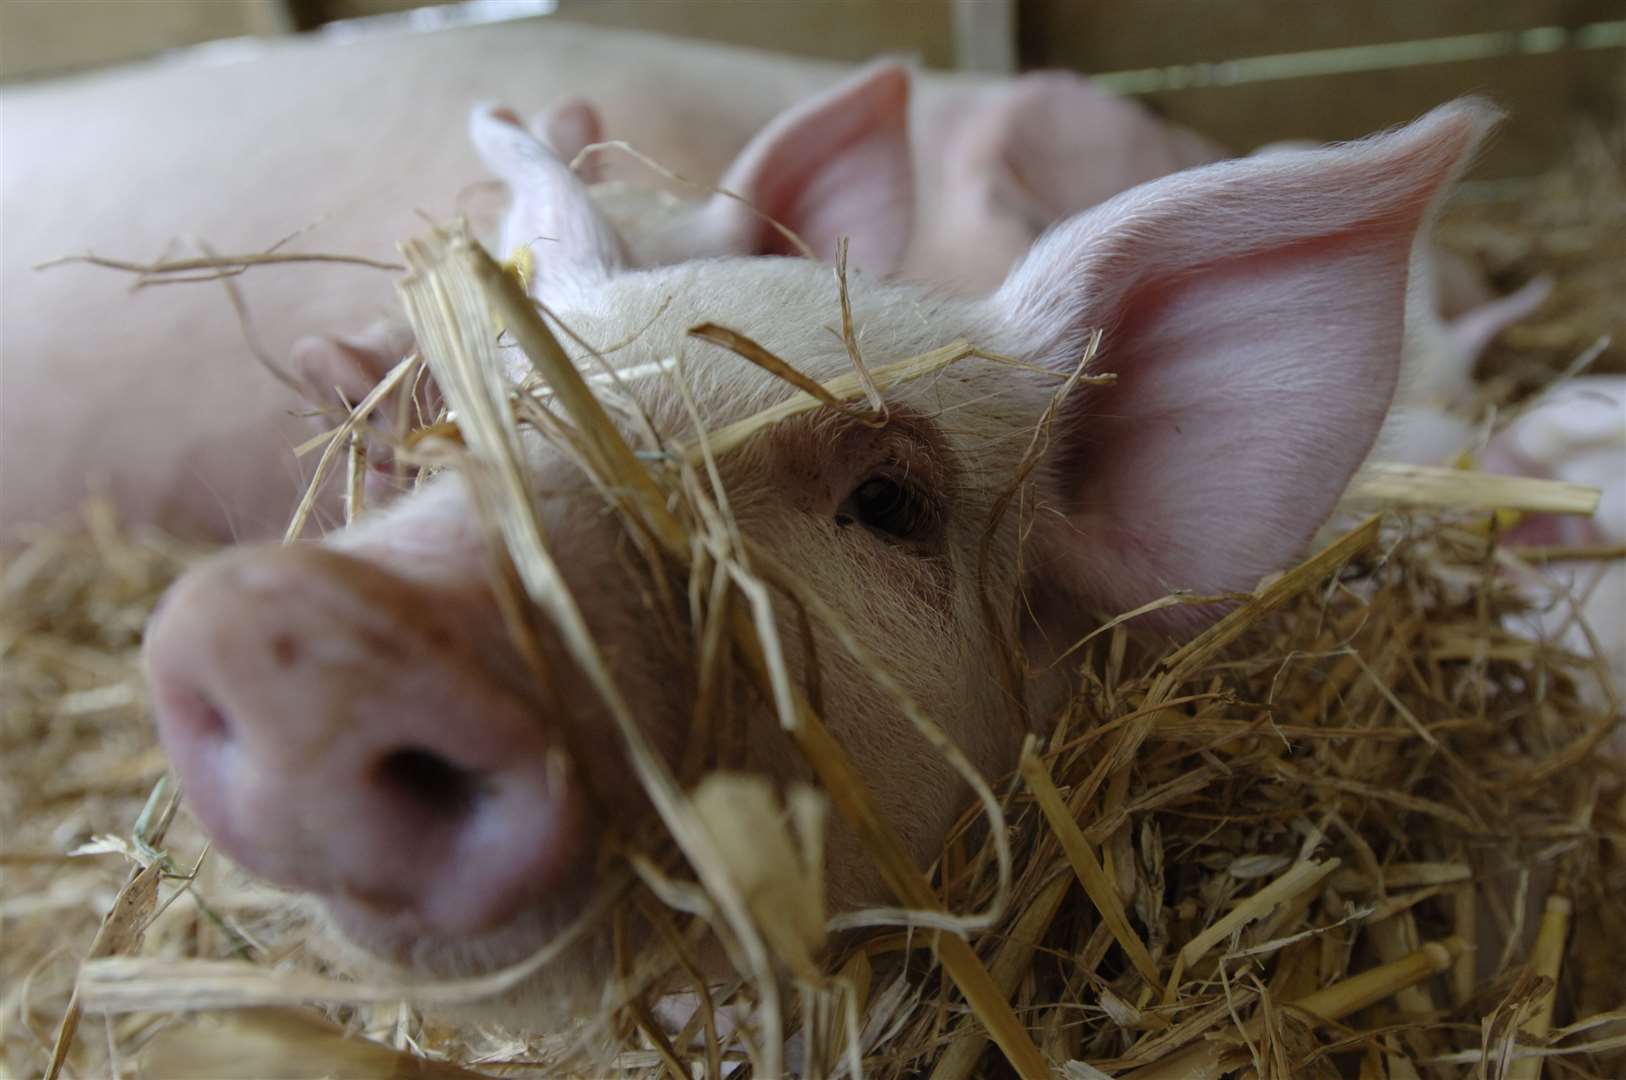 The clients who attend the farm help look after its many pigs